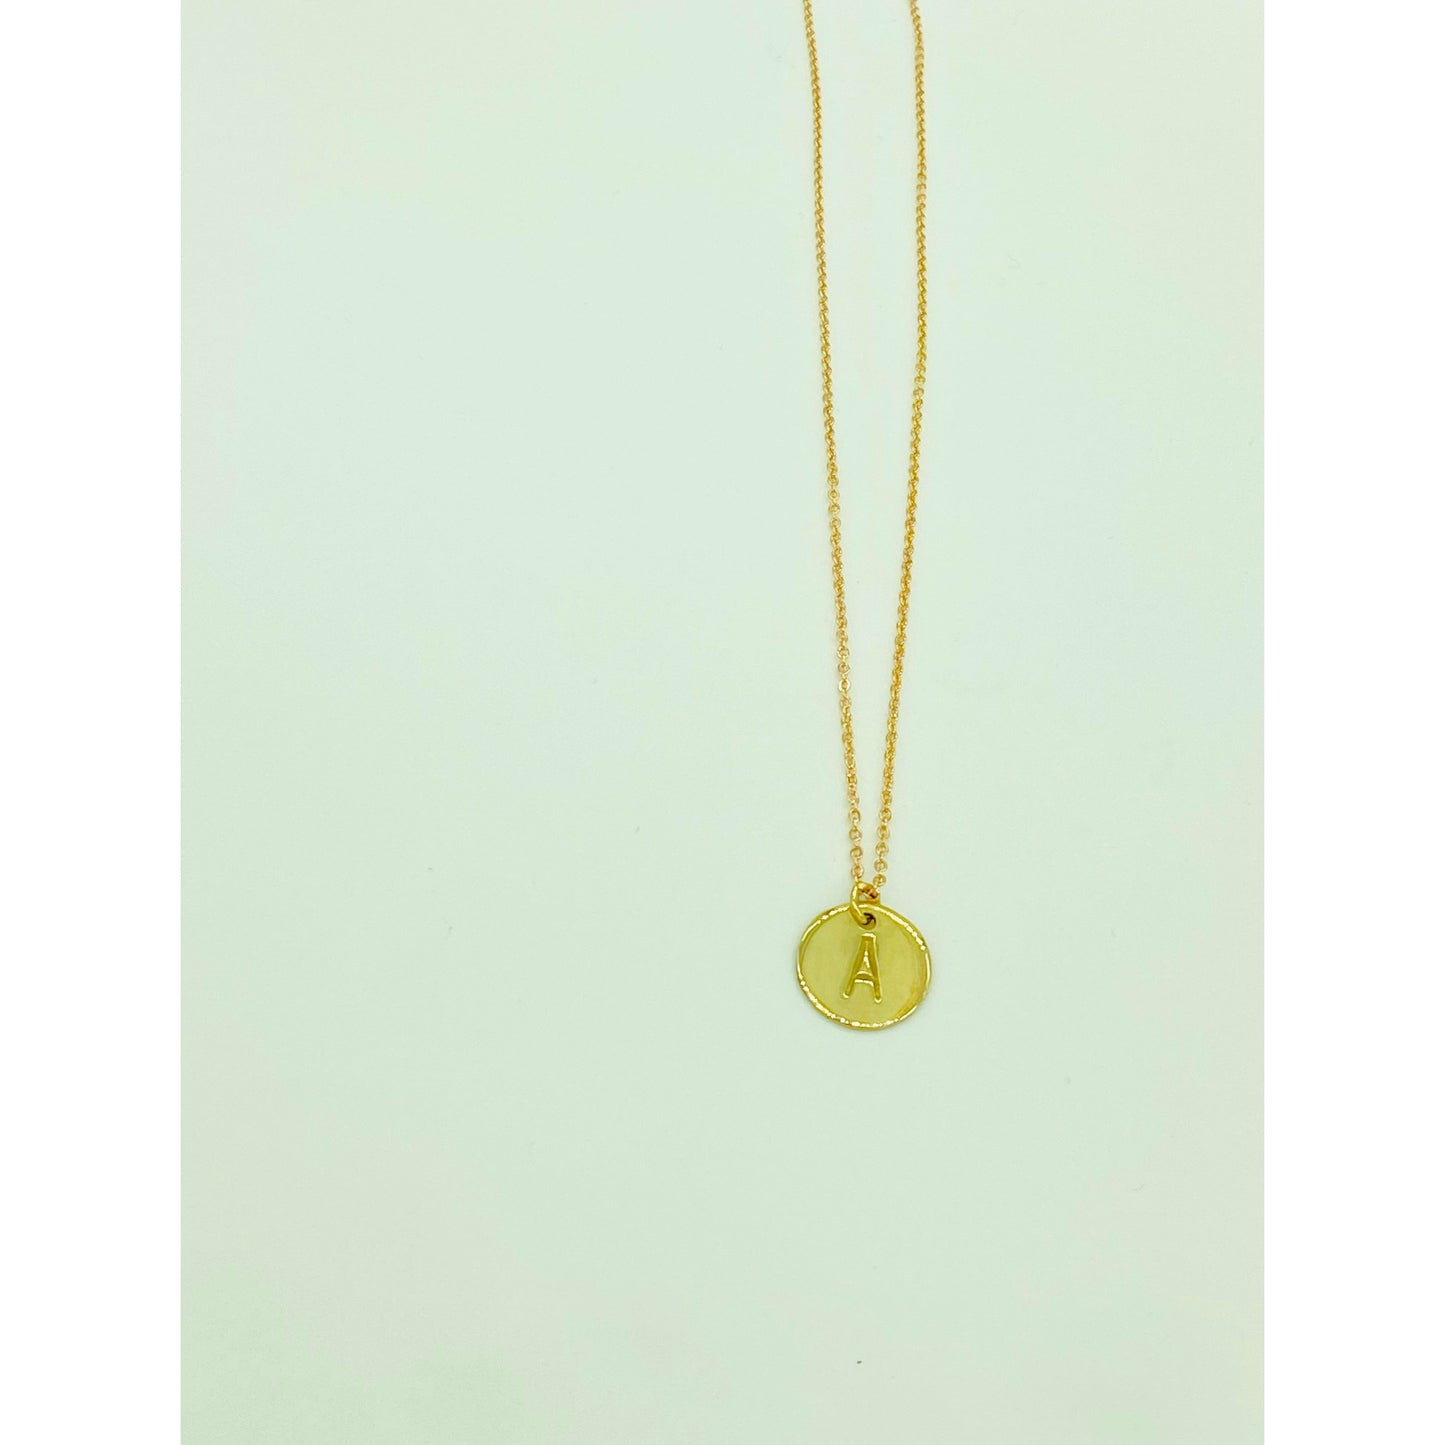 Small gold filled necklace with your choice of initial on a circle cut out. No patina added, gold on gold.